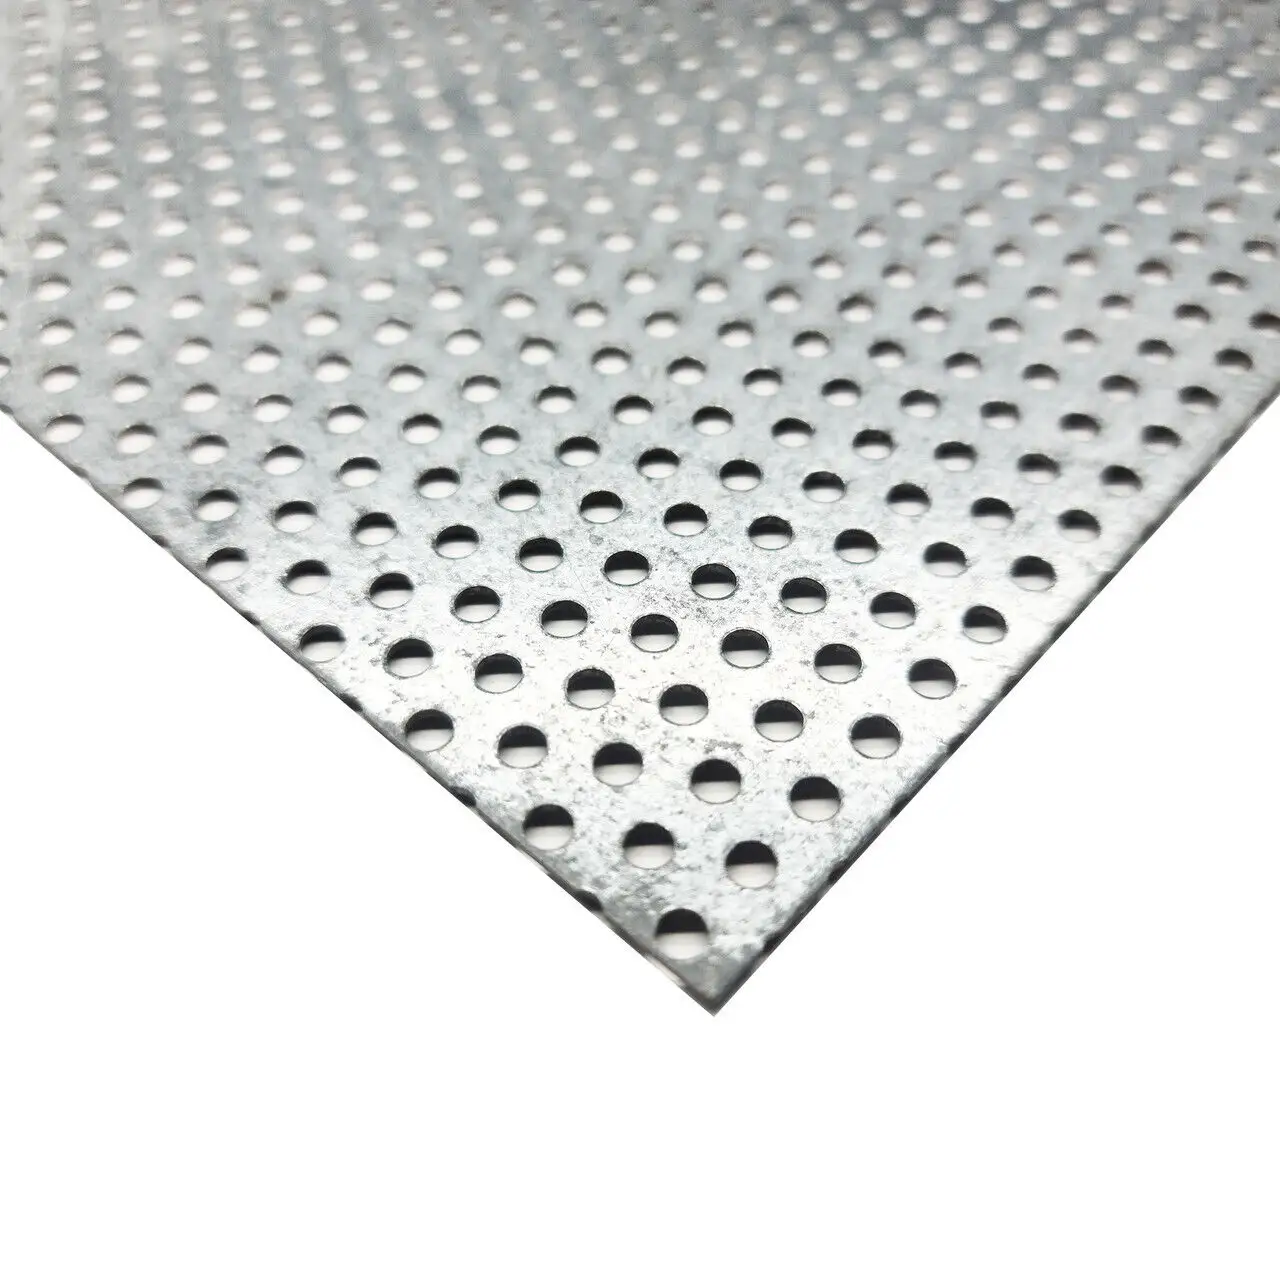 Factory Outlet Stainless Steel Aluminum Perforated Metal Sheet Perforated Mesh Speaker Grille Sheet